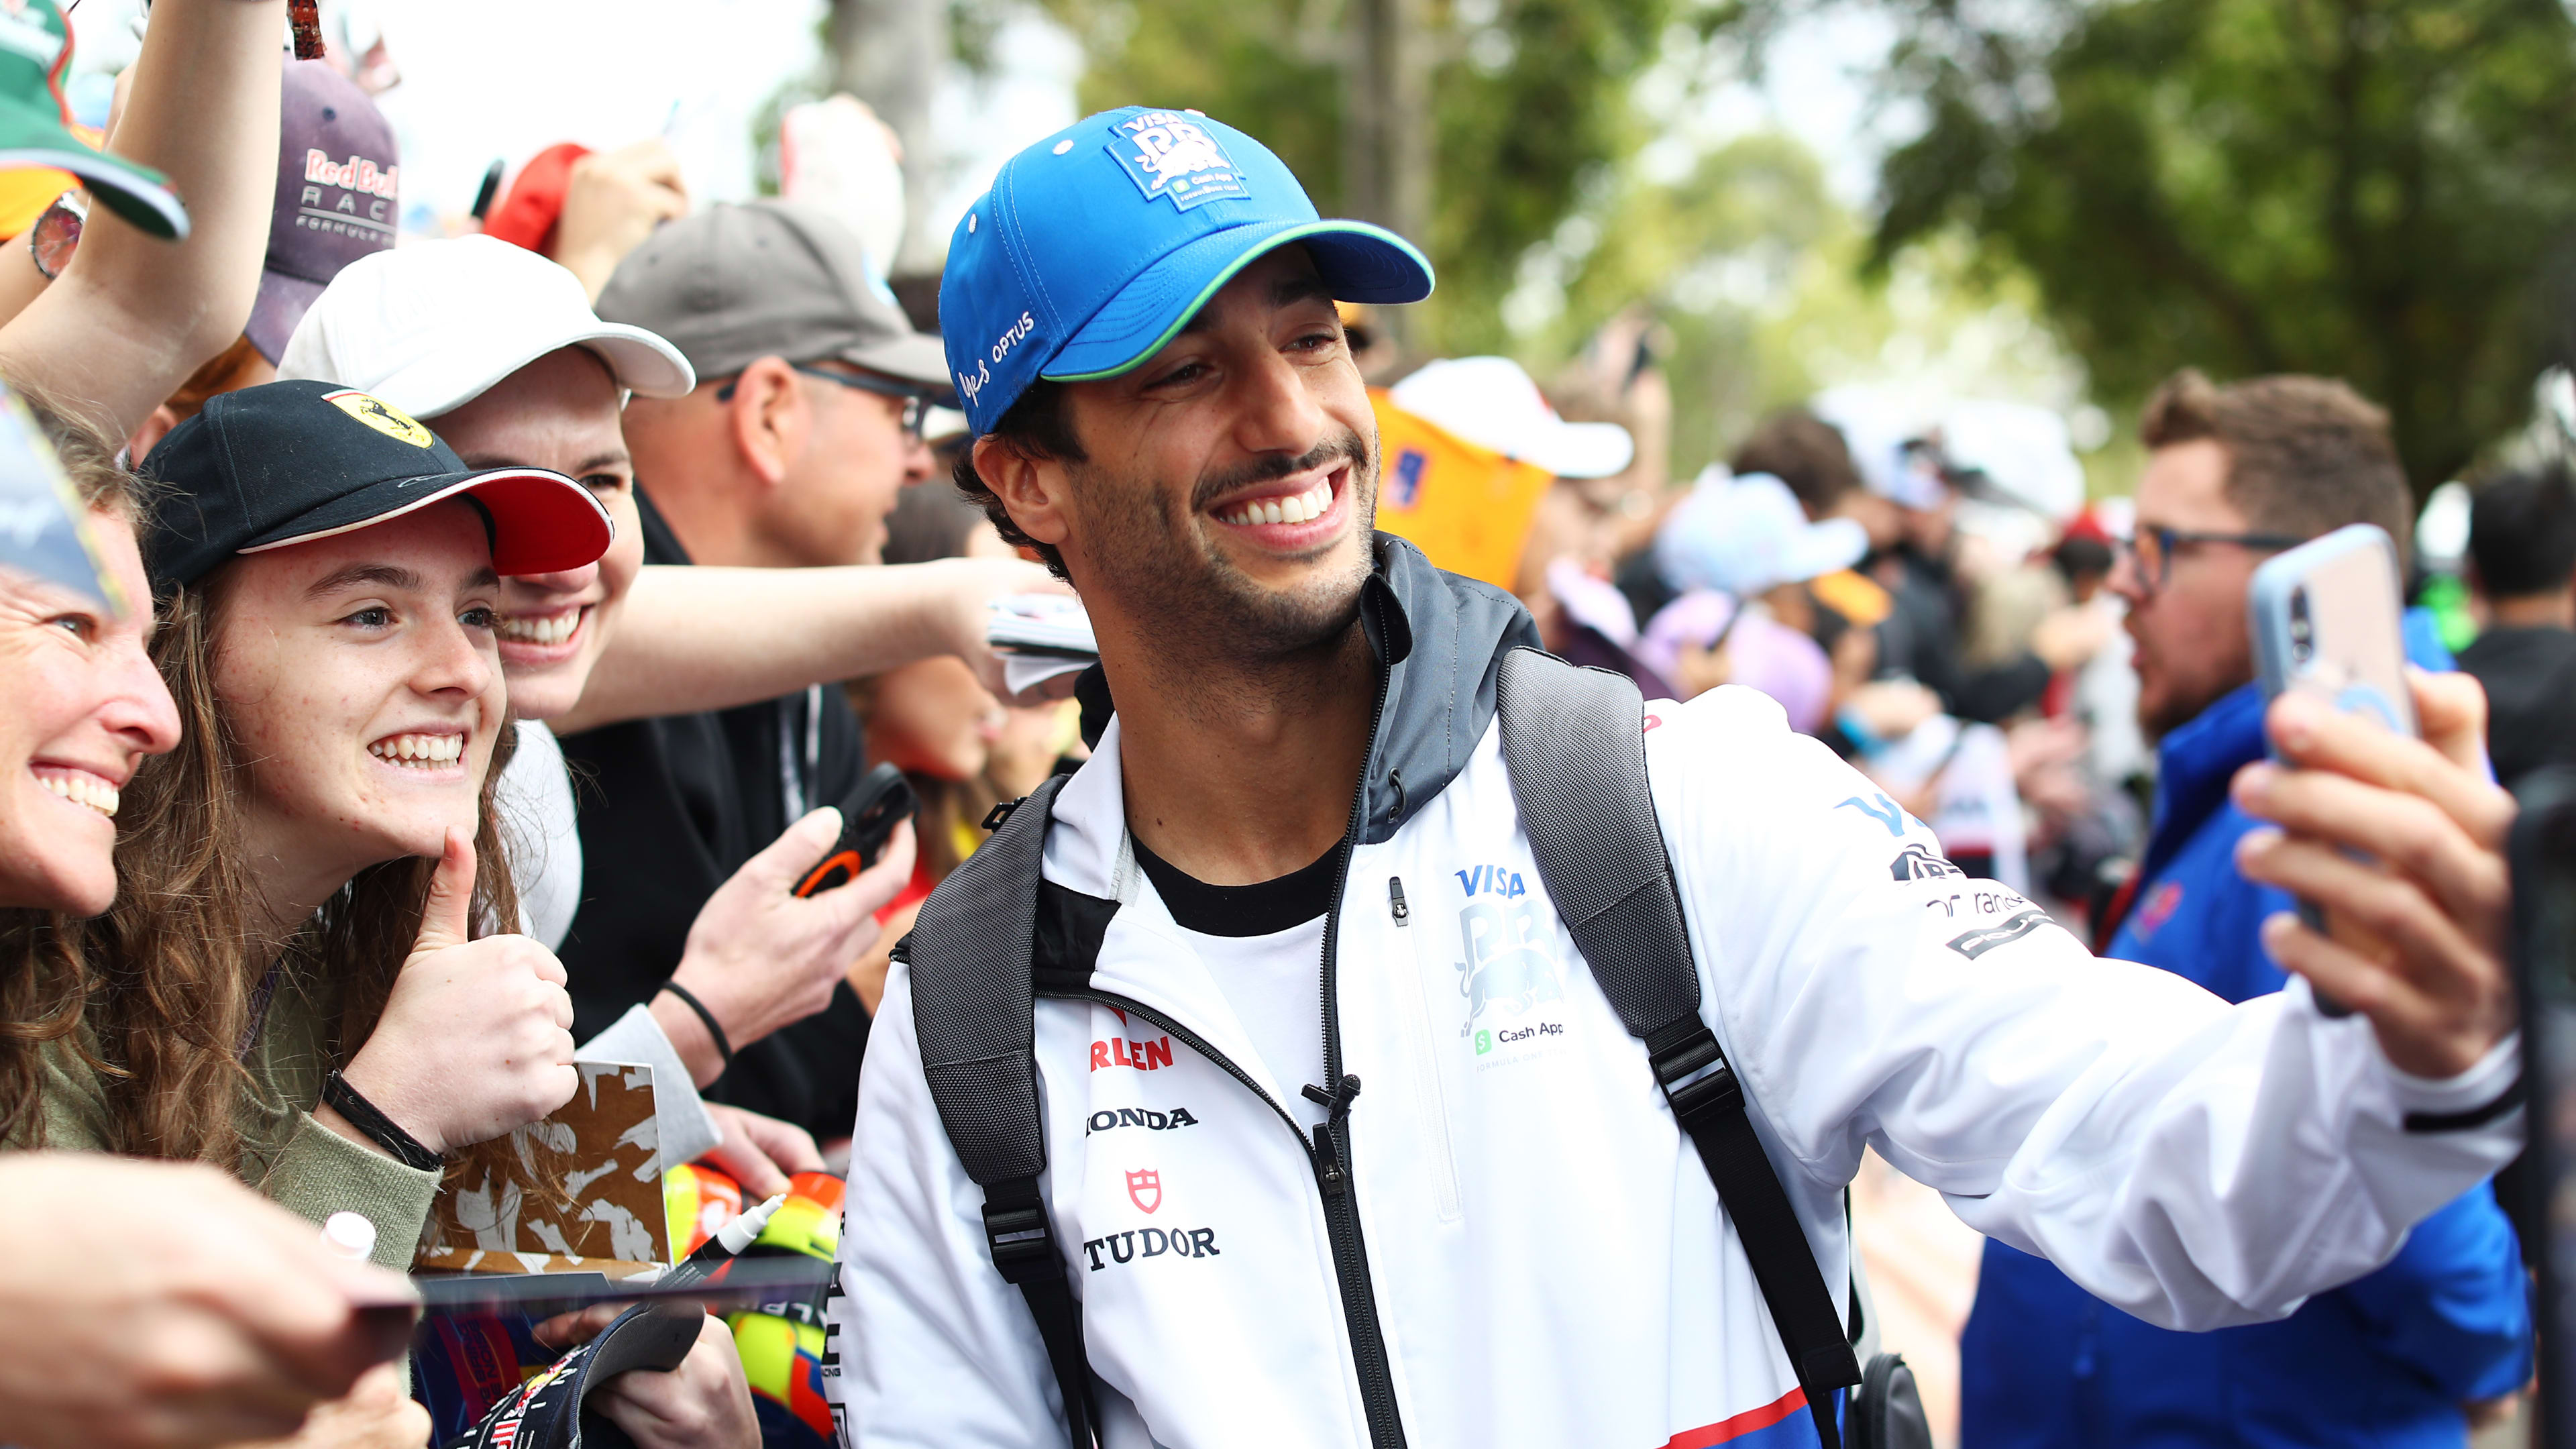 Racing with a smile and an excitement to compete – a re-energised Ricciardo is out to deliver for his fans once more